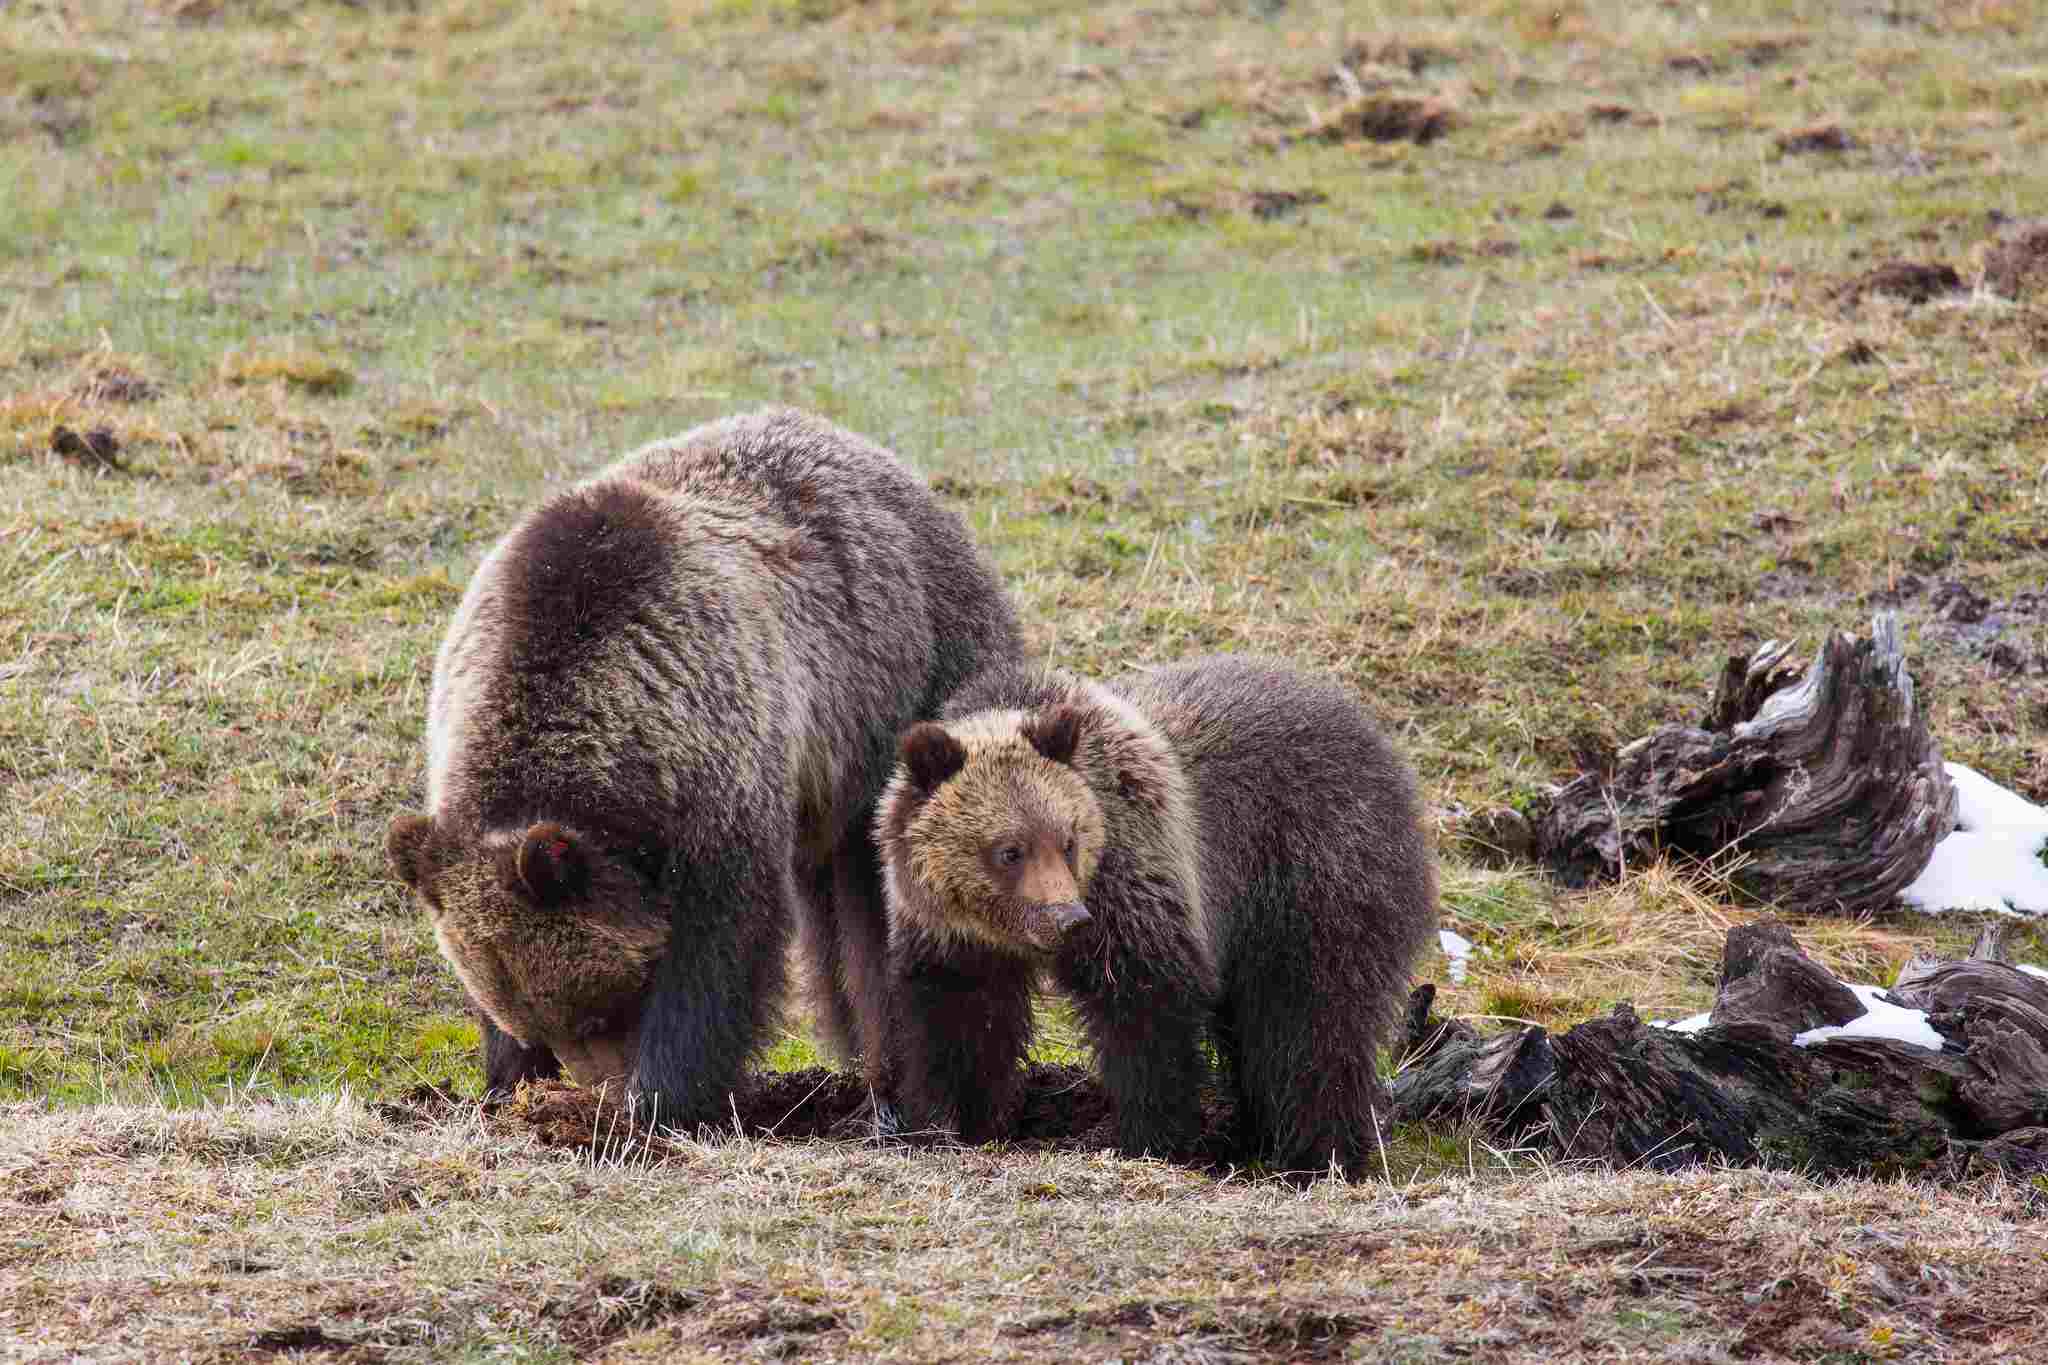 Grizzly Bear Vs Black Bear: The Grizzly Bear's Fur Provides Camouflage in Some Environments (Credit: Neal Herbert 2017 .PDM 1.0.)